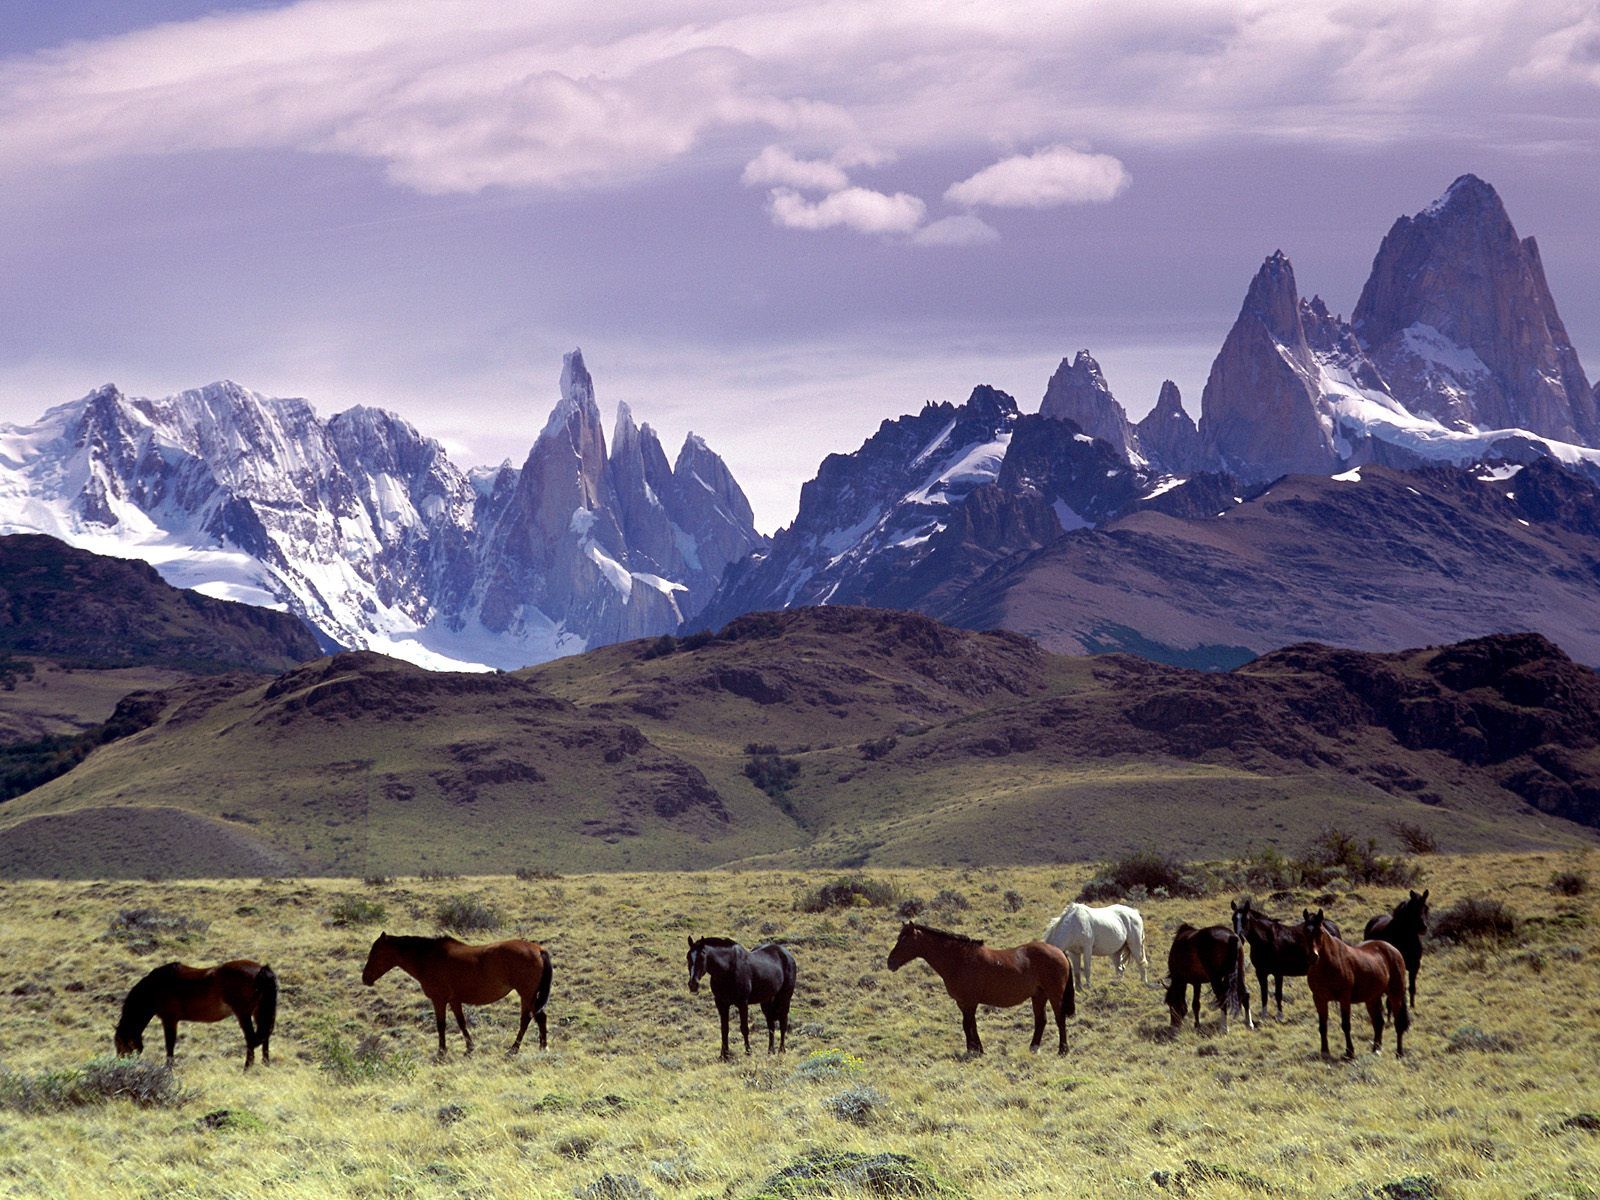 The Andes Mountain Range